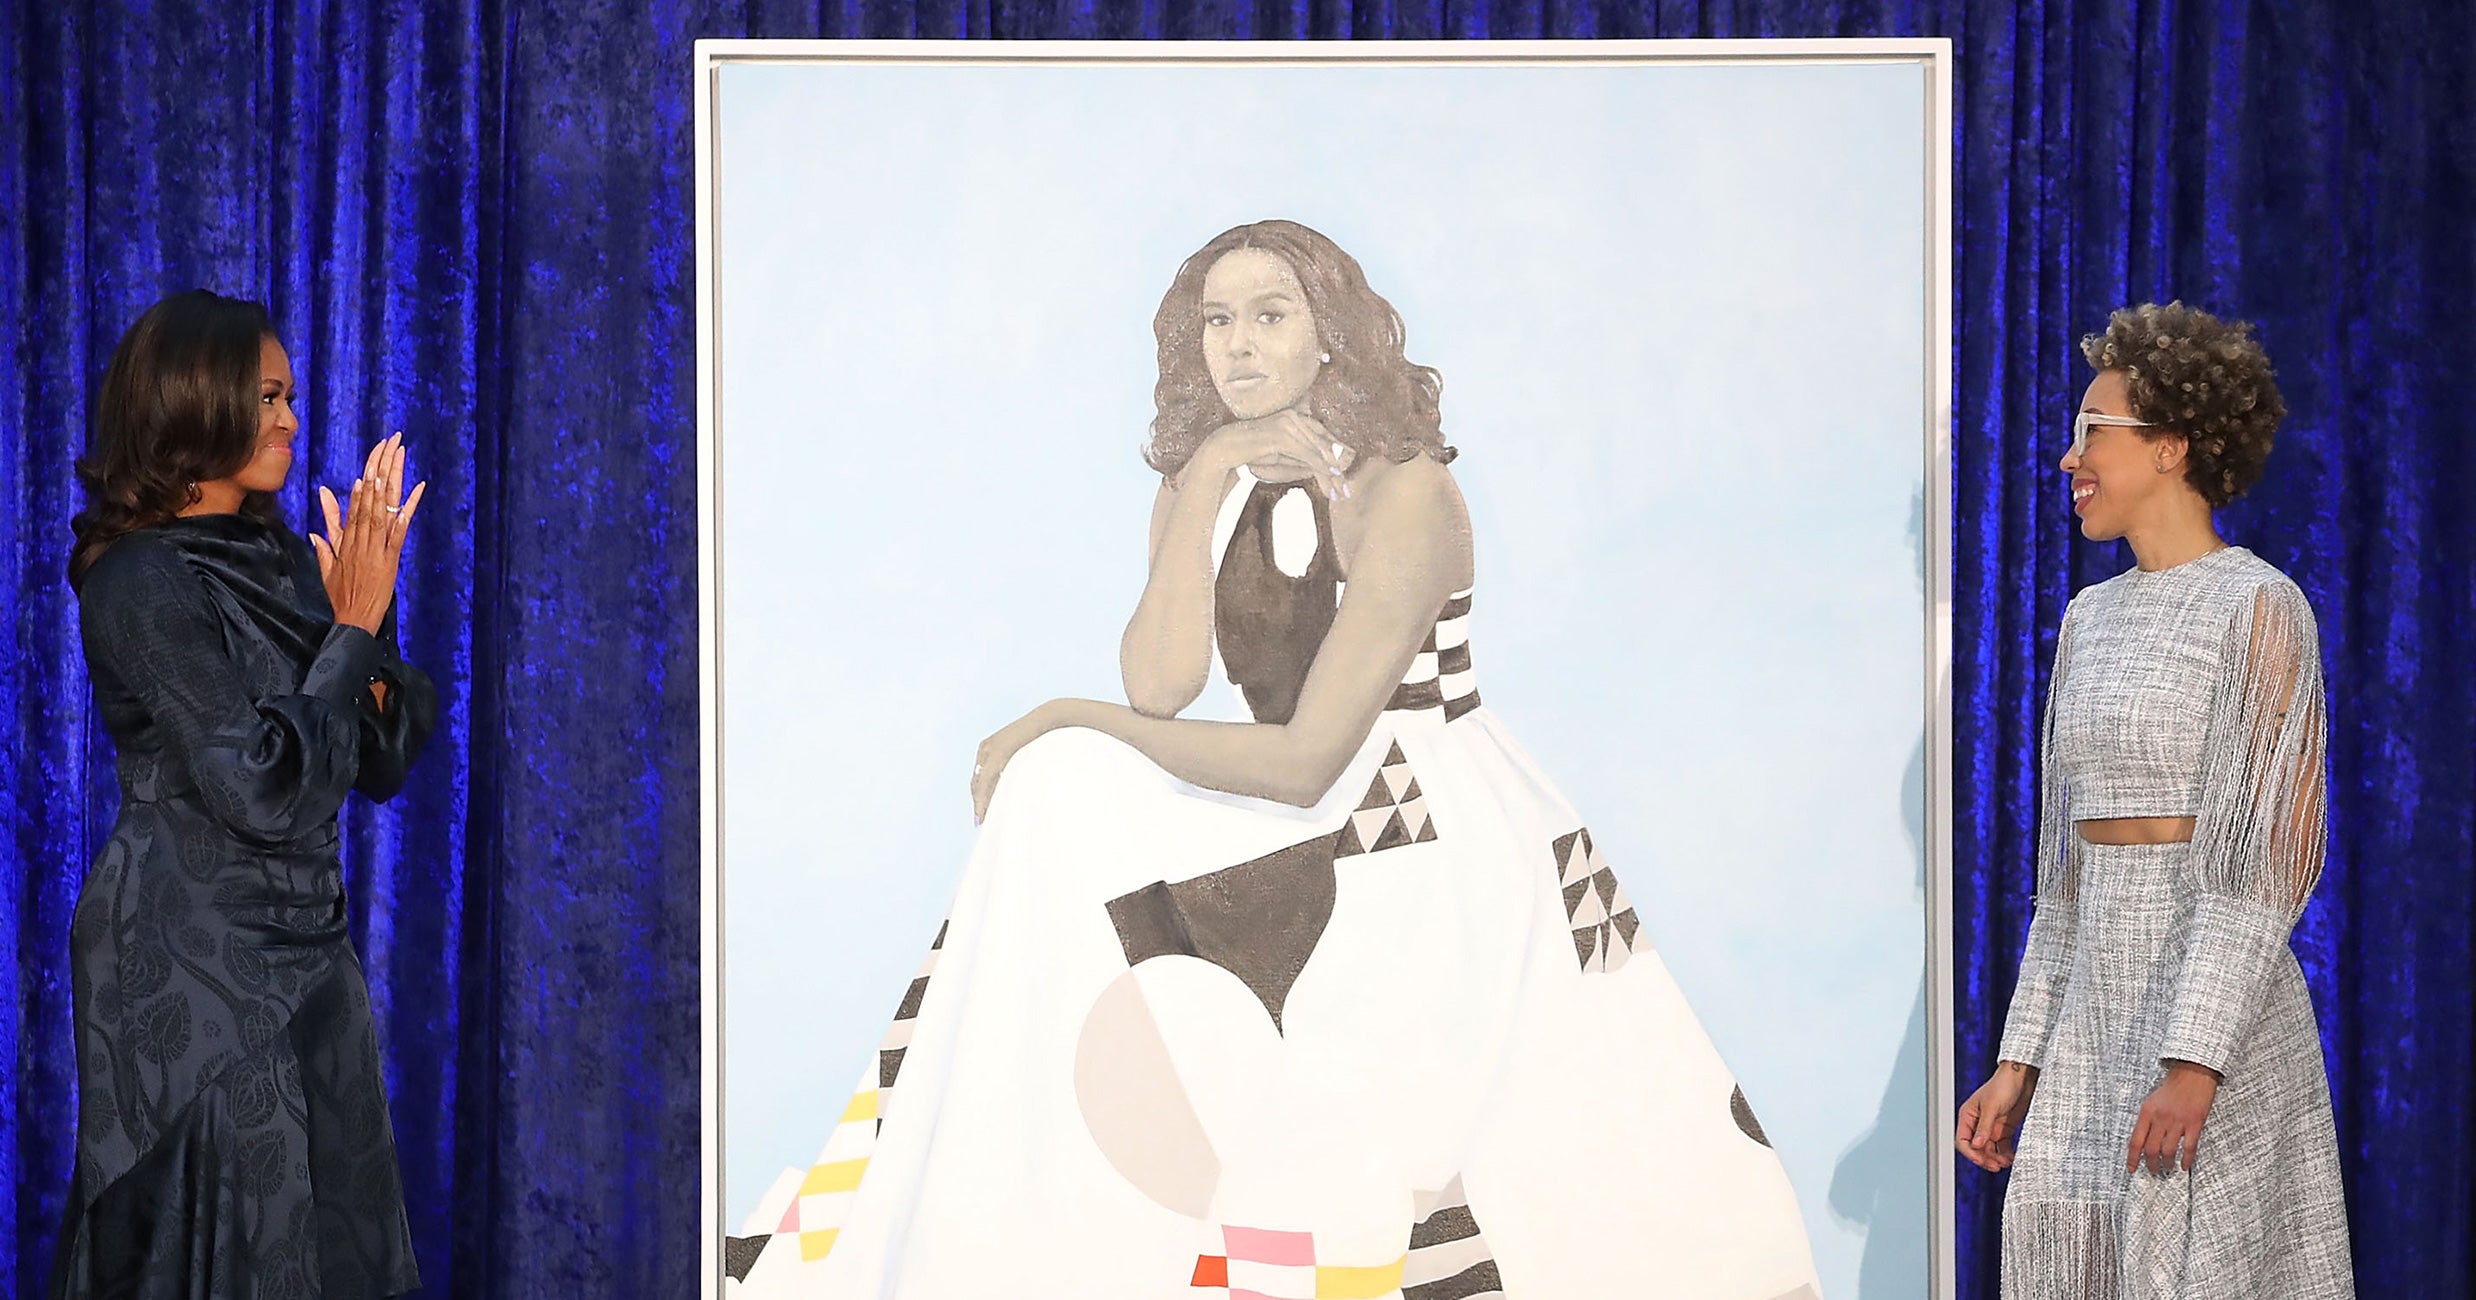 Michelle Obama’s Portrait Dress Made History. Here’s How It Came Together